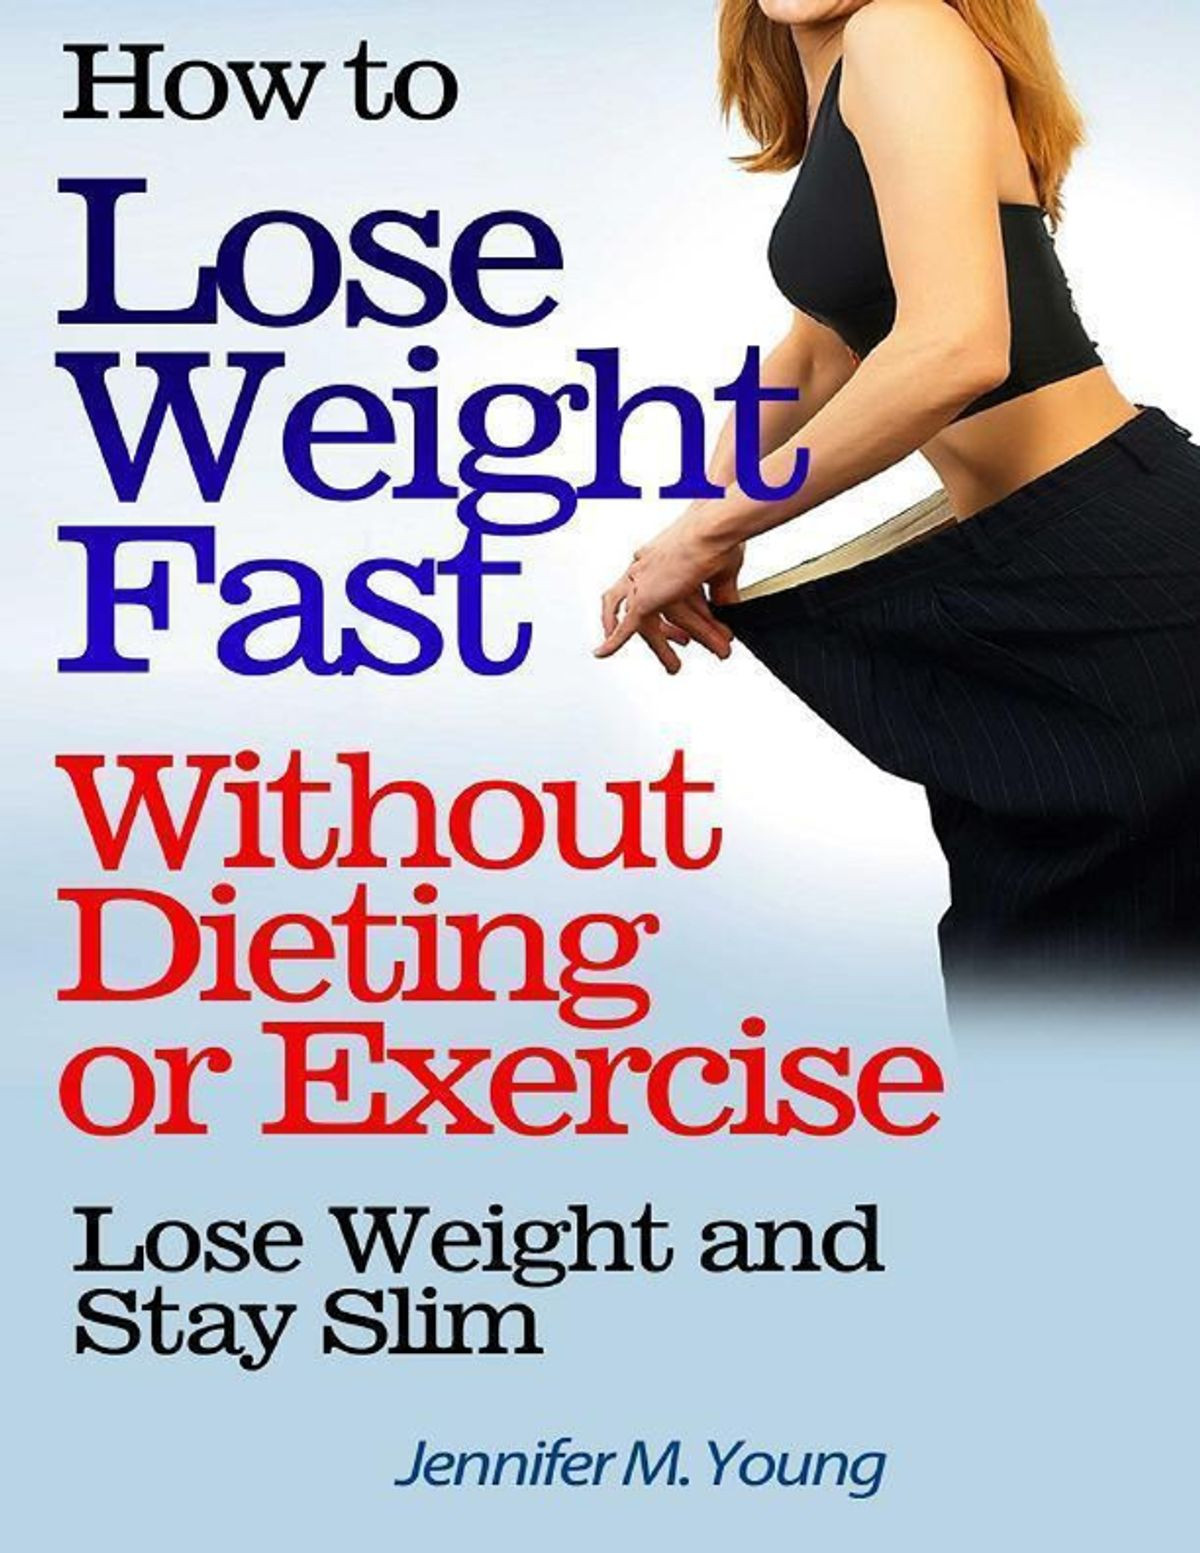 How To Lose Weight Quickly Without Exercise
 How to Lose Weight Fast Without Dieting or Exercise Lose